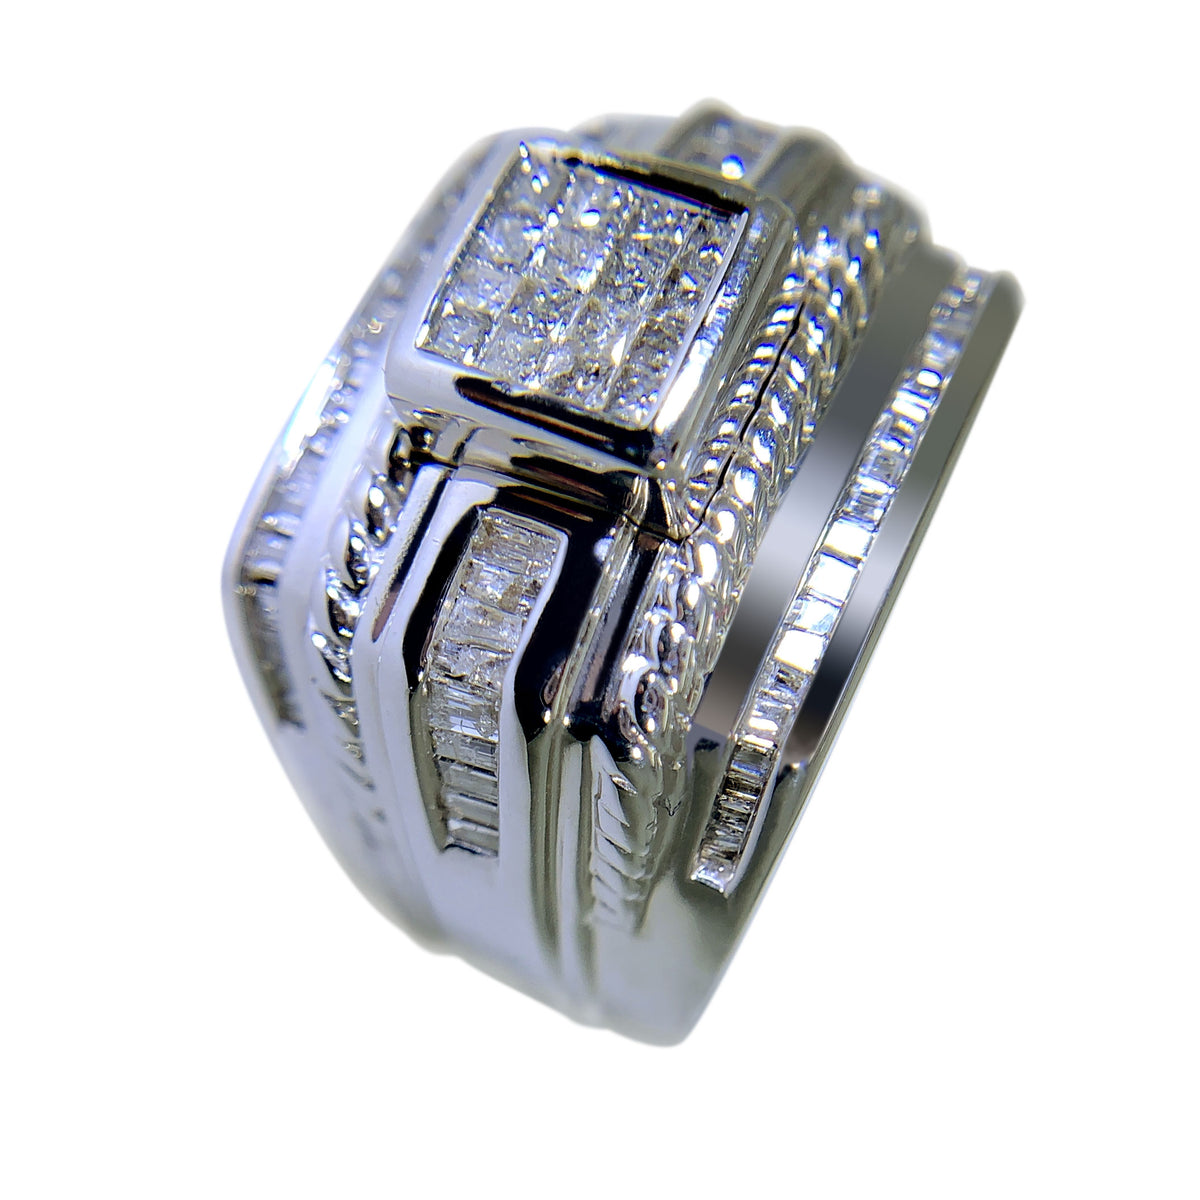 14 KT WHITE GOLD - WONDERFUL MENS RING WITH BAGUETTE AND PRINCESS DIAMONDS - 2.54 CT